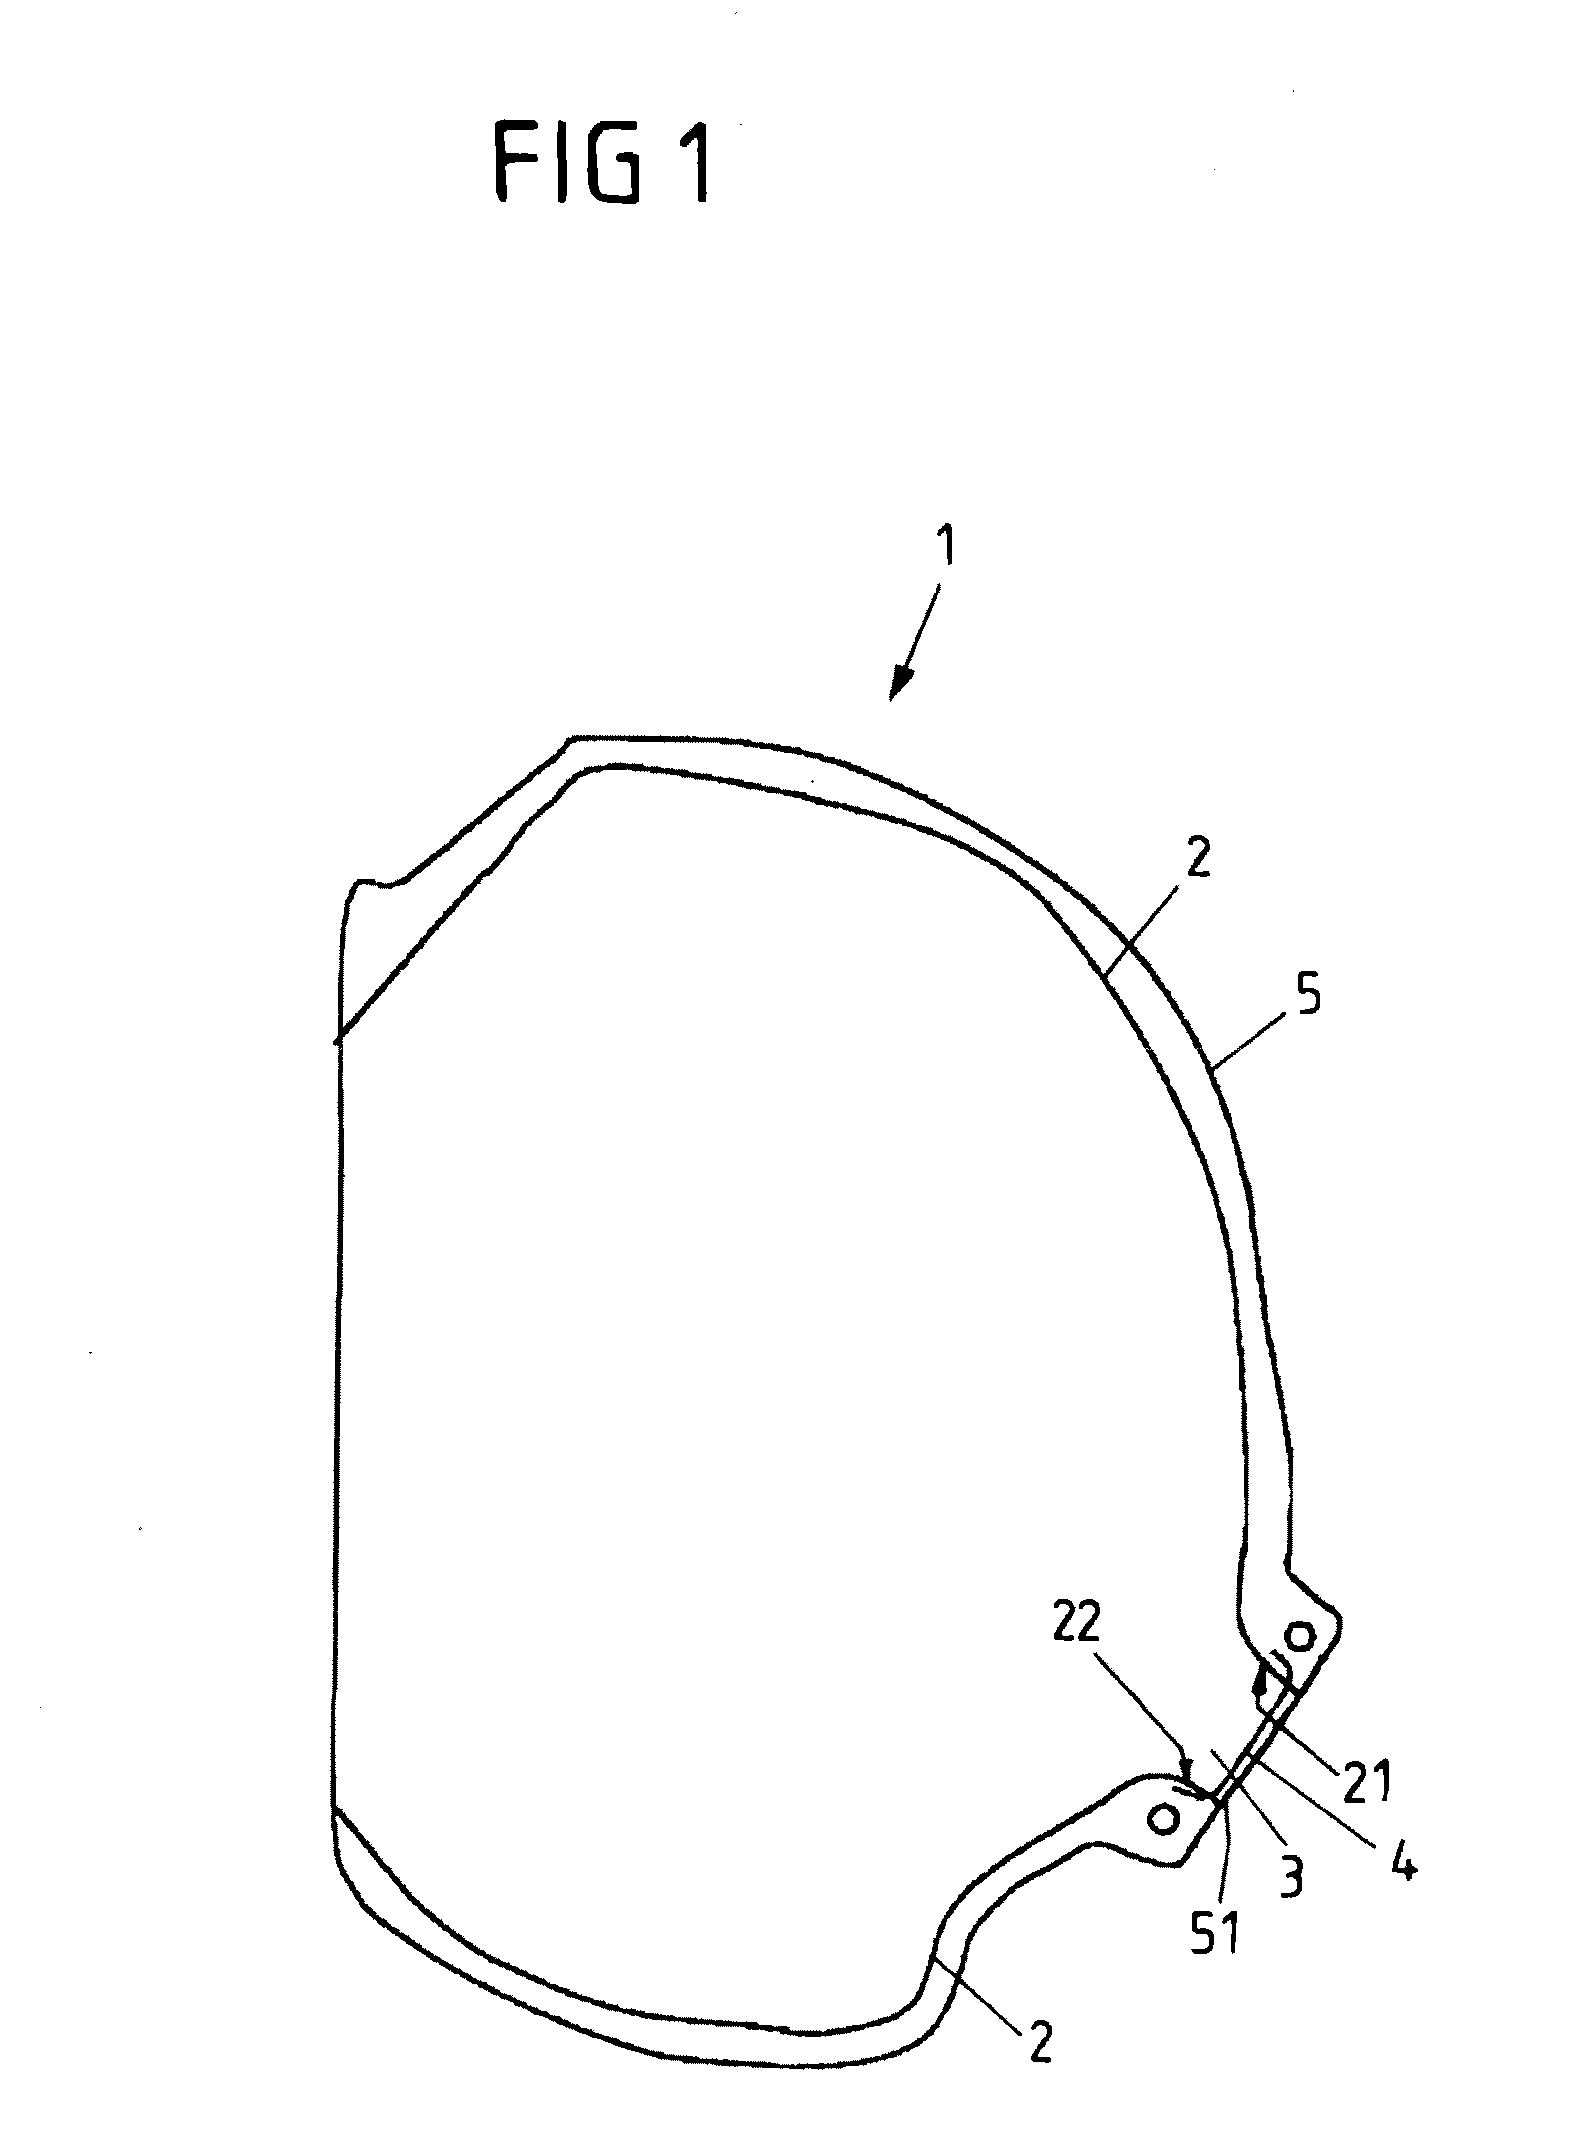 Vehicle occupant restraint system comprising an inflatable gas bag